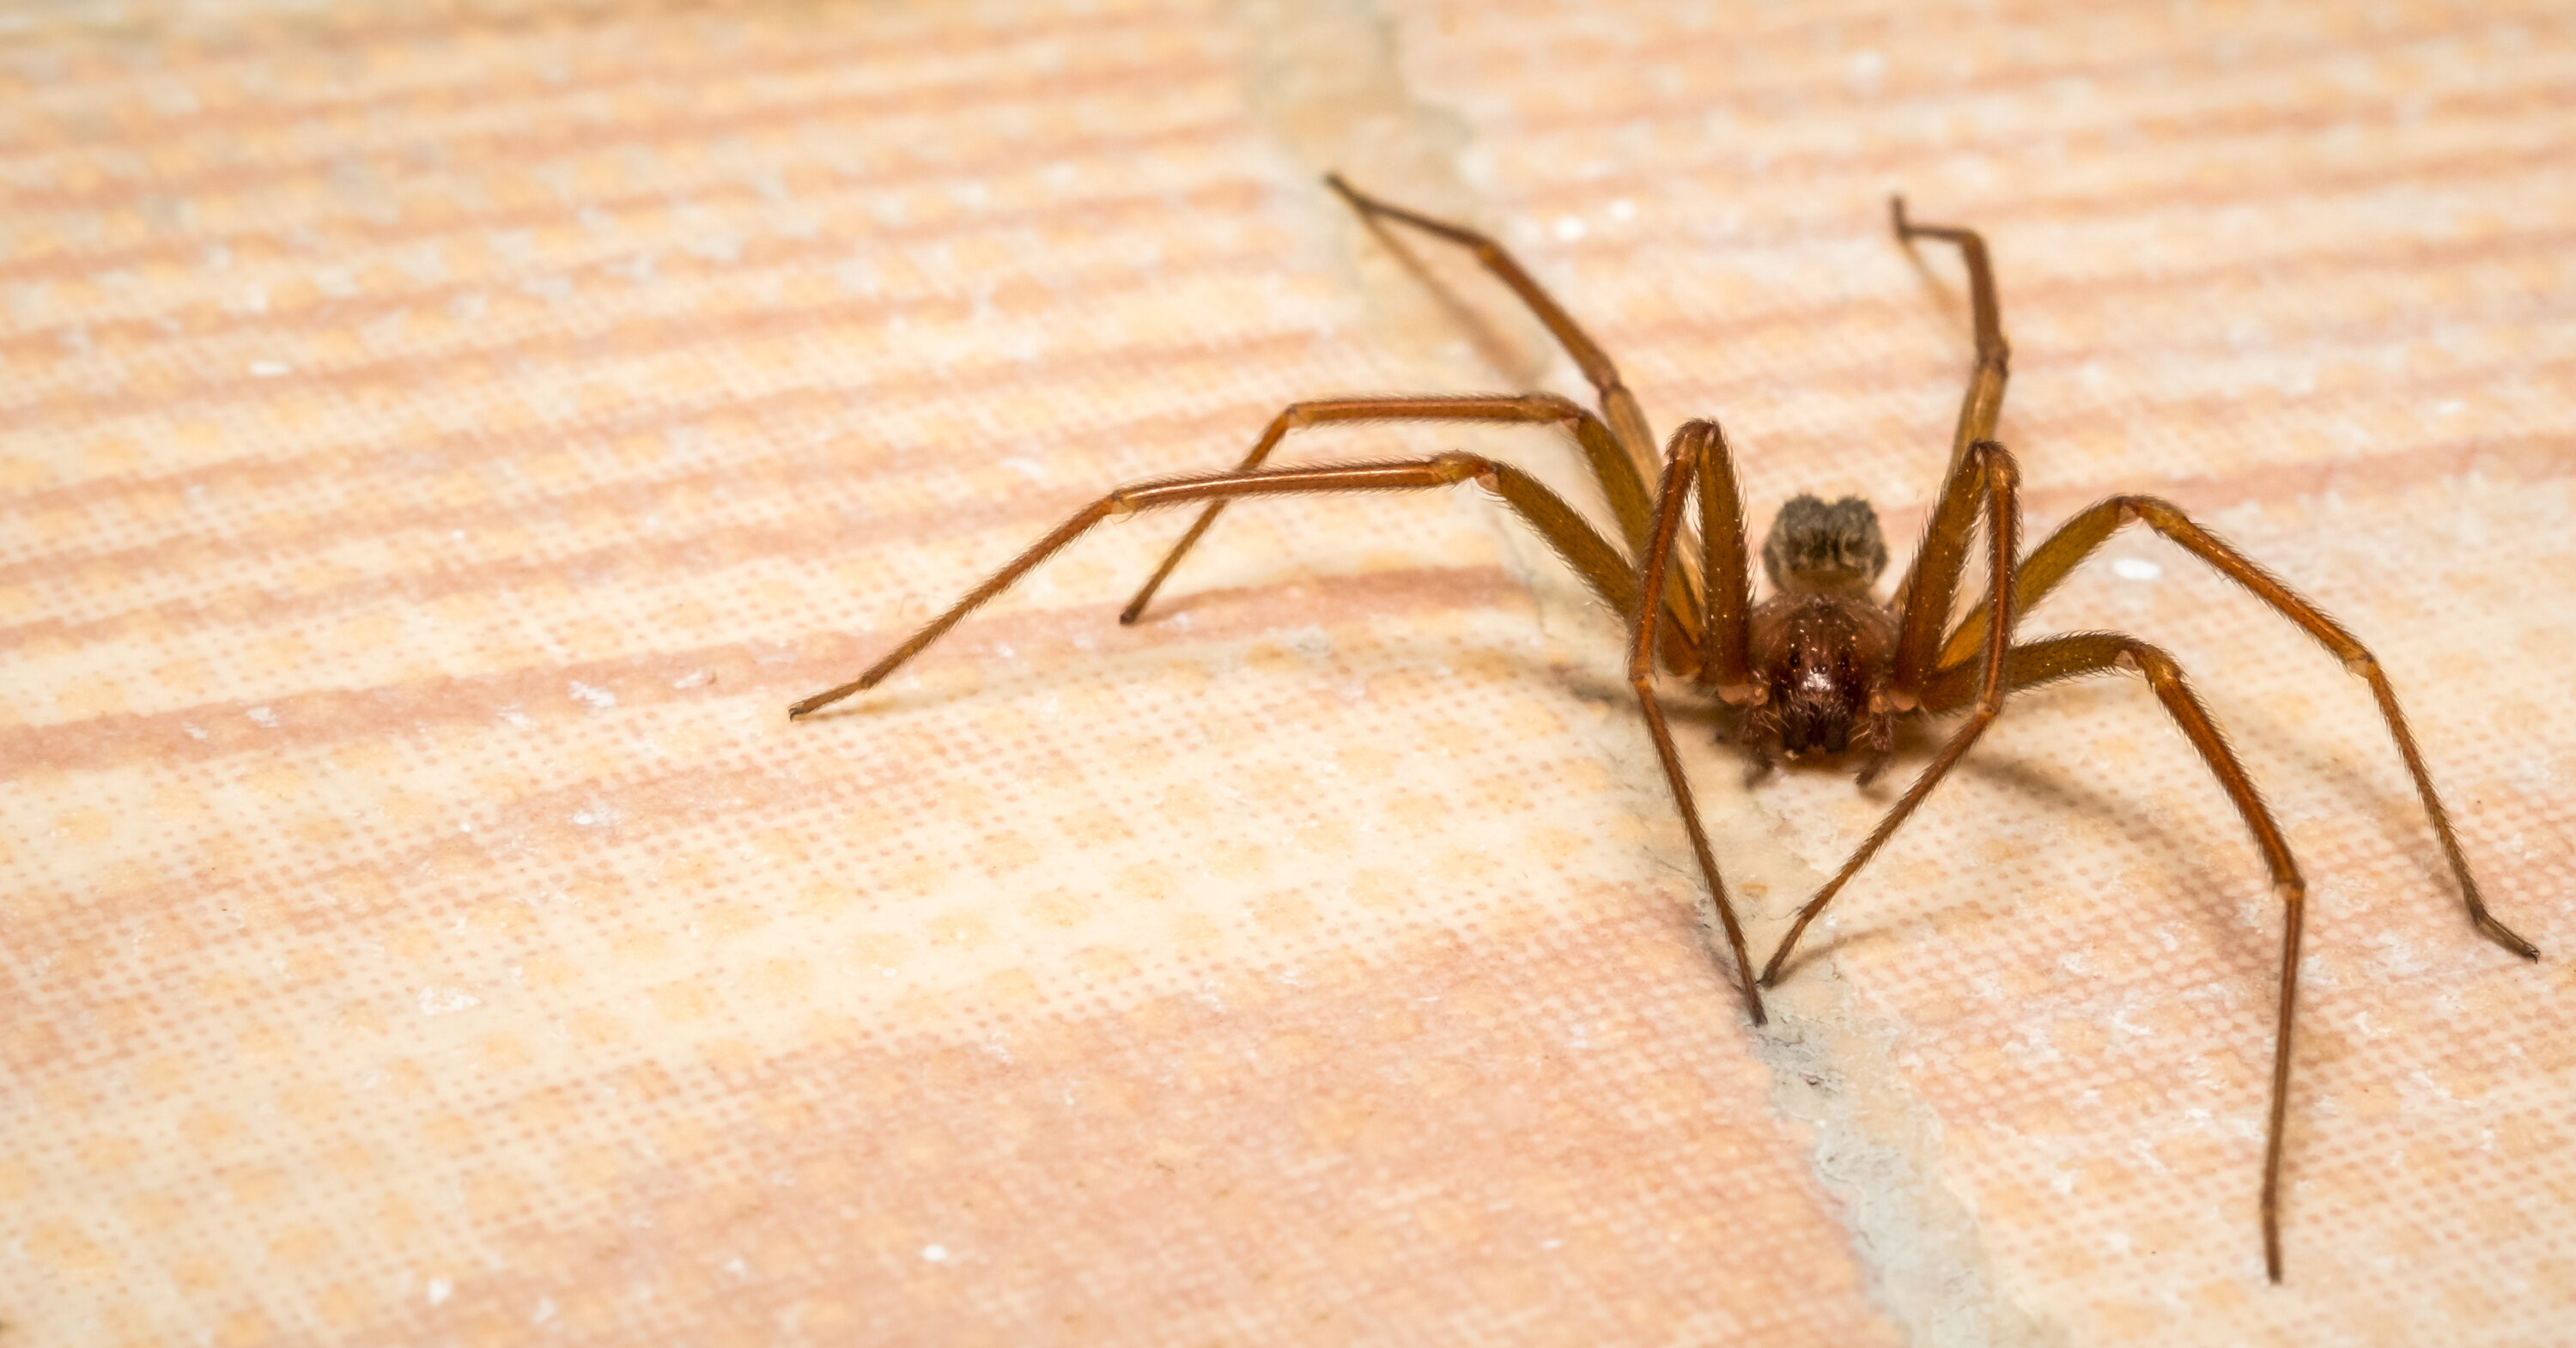 Close up shot of a brown recluse spider on a tiled tan floor 